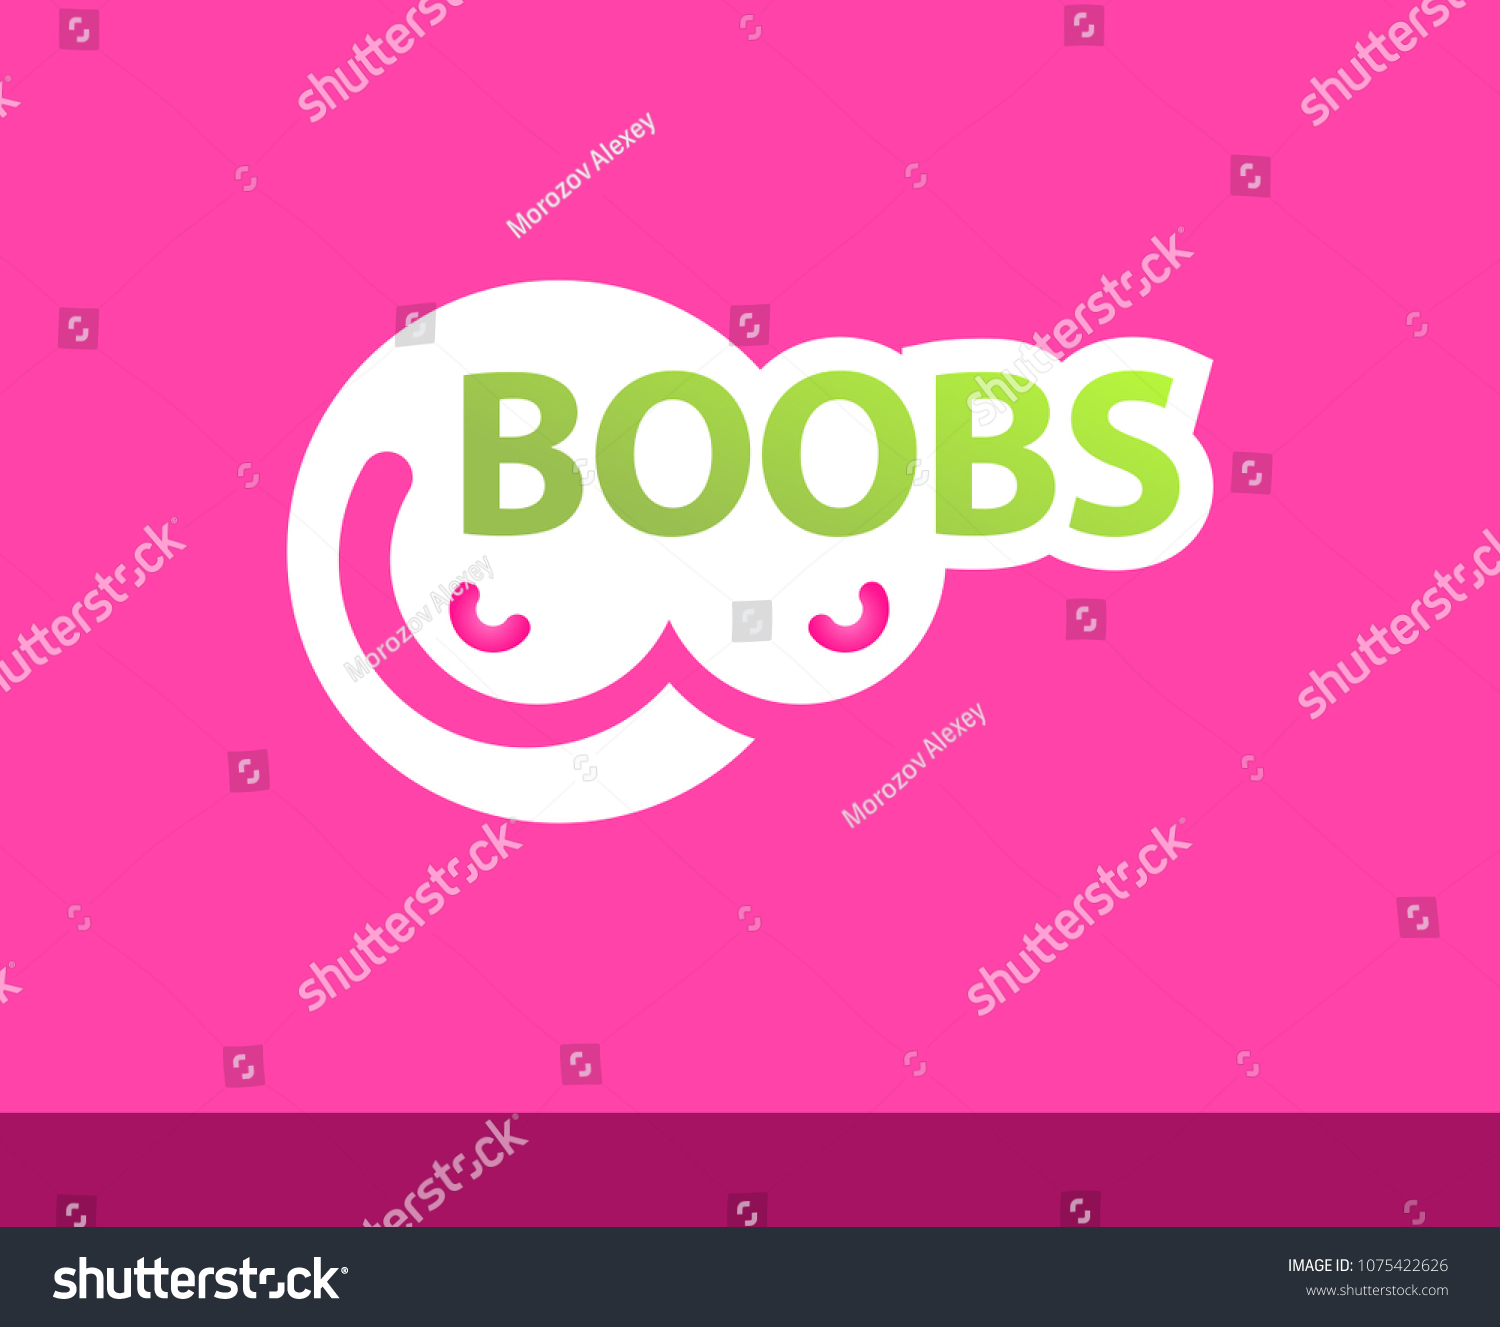 Adult Logo Girls Boobs On Pink Stock Vector Royalty Free 1075422626 Shutterstock